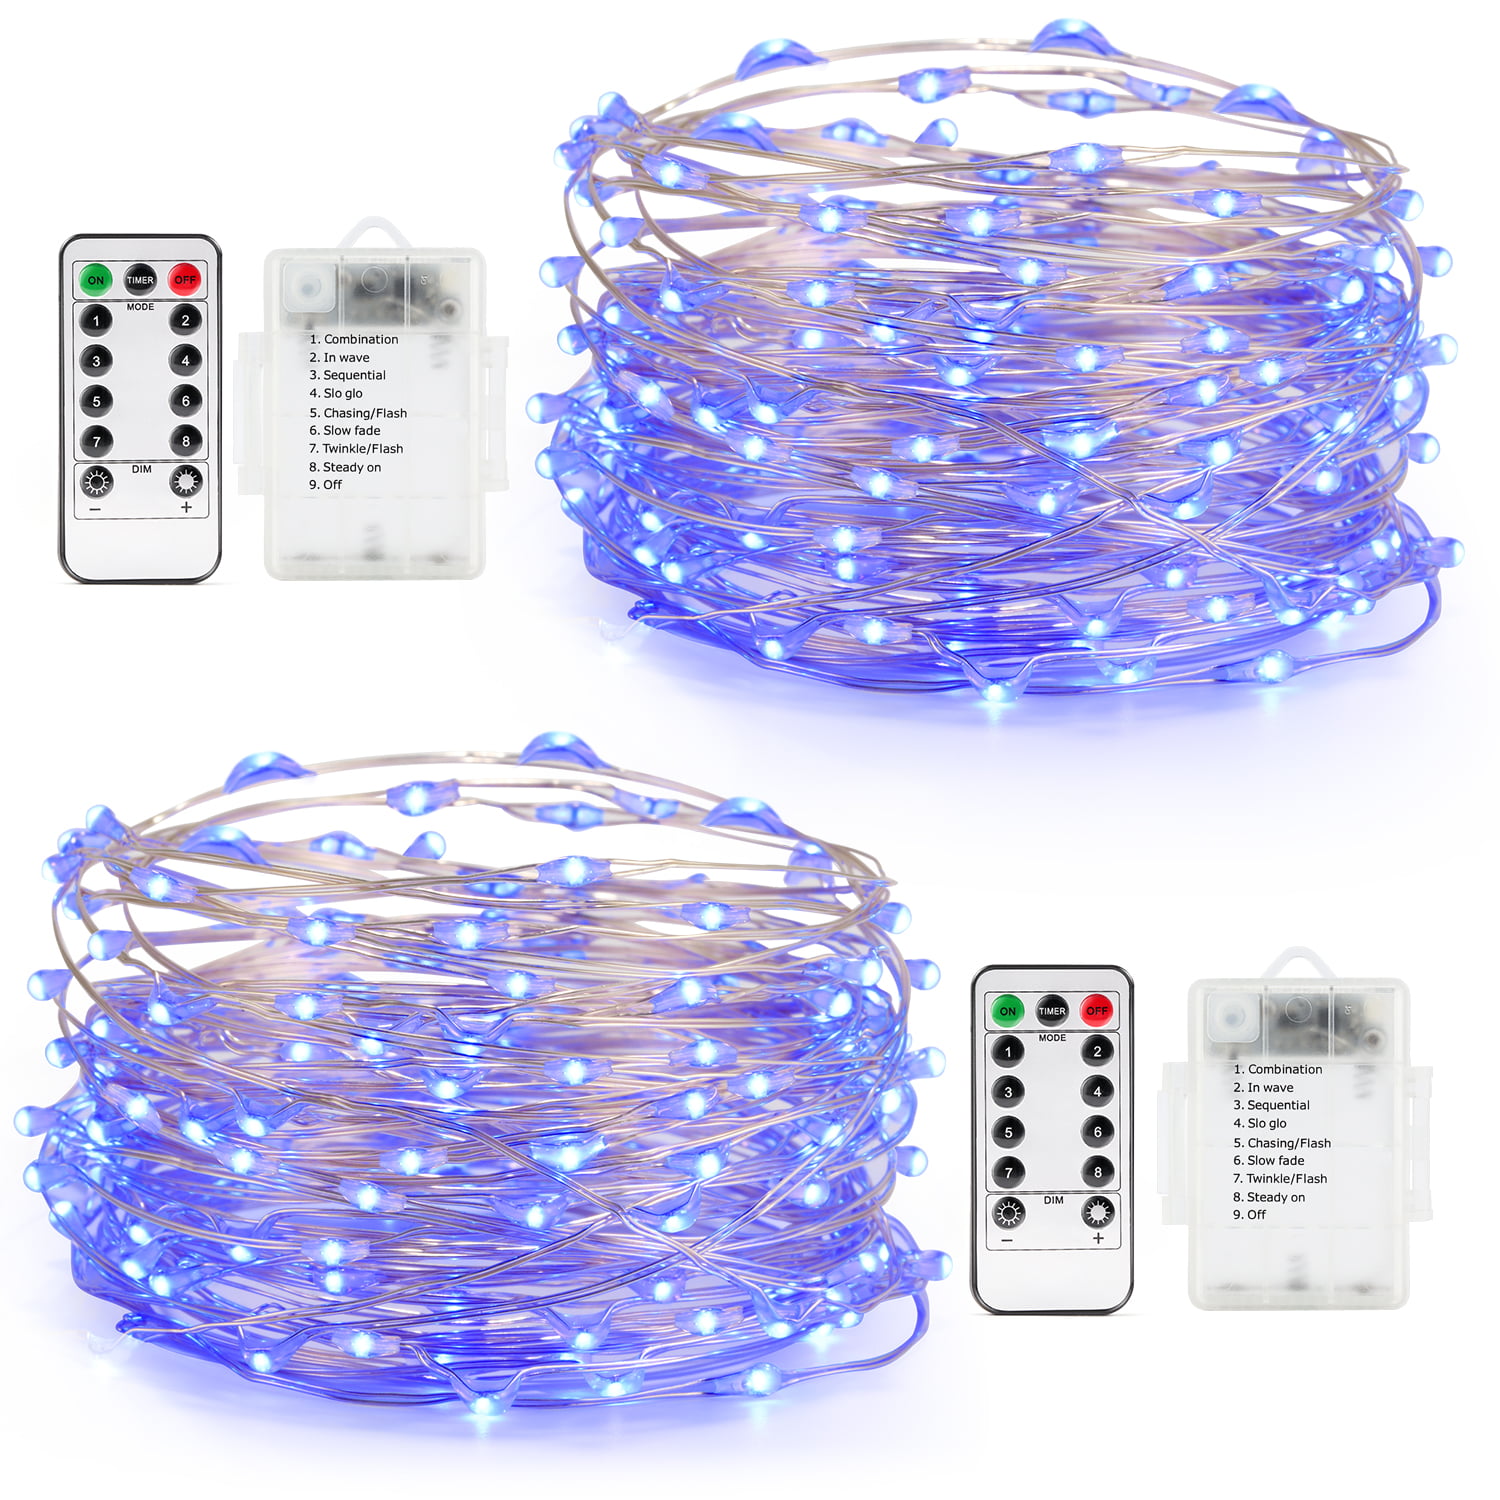 Kohree String Lights Christmas Lights Copper Wire Fairy Lights Remote Control Timer Battery Operated Waterproof 100 LED 33FT Firefly Lights for Bedroom Wedding Festival Décor 2 Packs